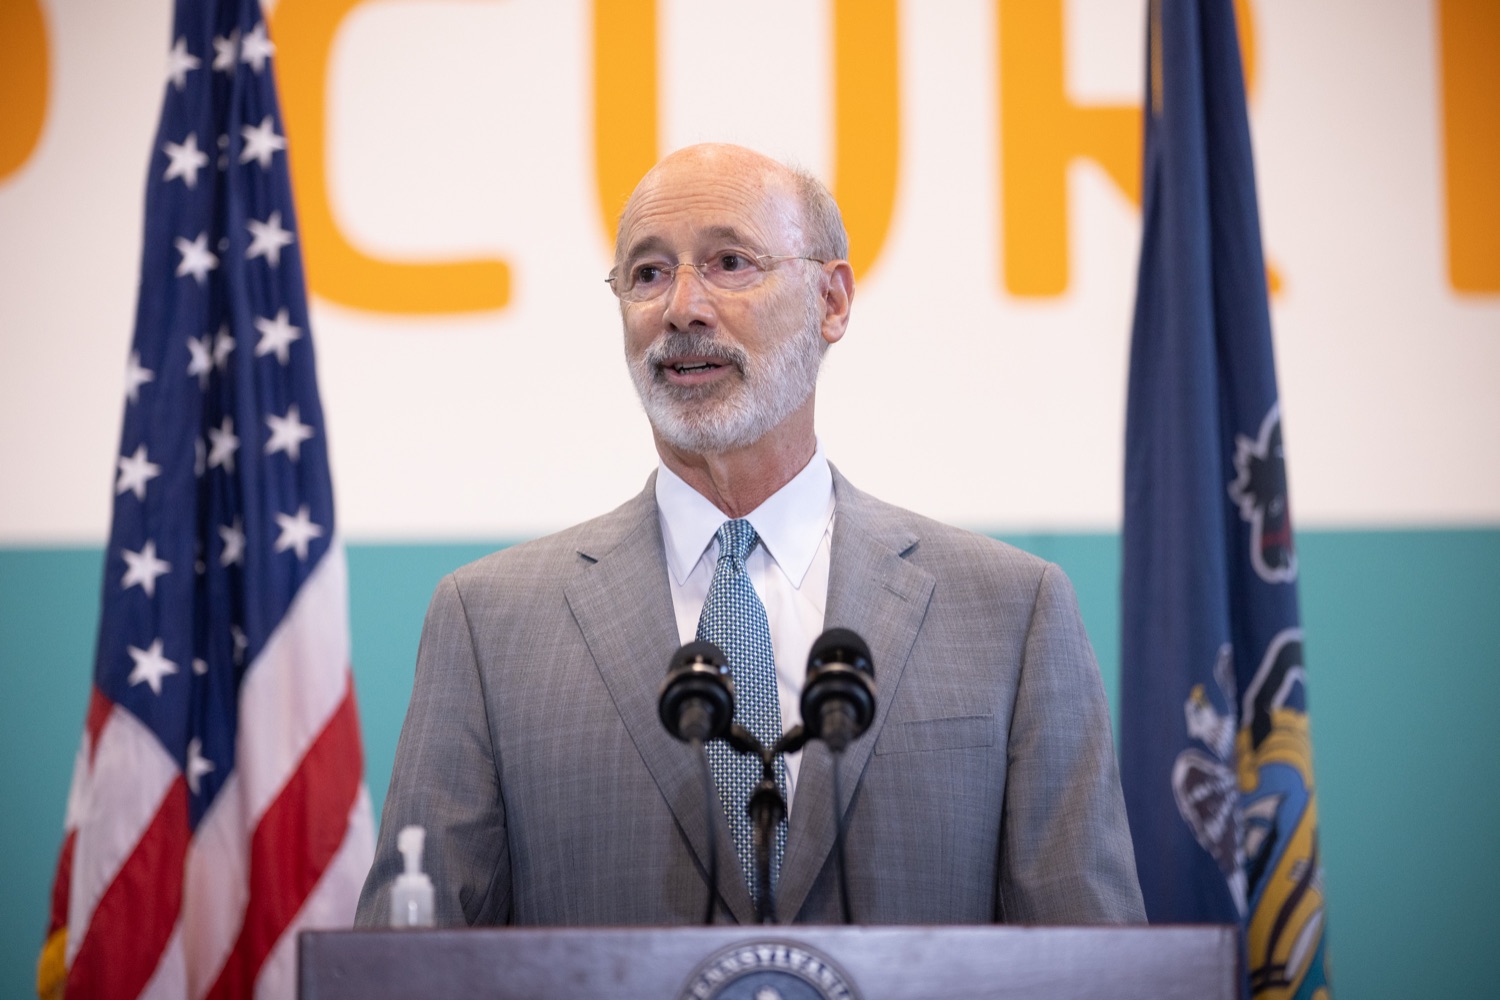 Pennsylvania Governor Tom Wolf speaking with the press.  With some politicians spreading lies about our elections to divide us, Governor Tom Wolf today vowed to protect the freedom to vote and oppose legislation that would create barriers to voting and silence the voices of some Pennsylvanians. These are the same lies that led directly to the appalling assault on our U.S. Capitol and our democracy on January 6, and now, just a few short months later, the same people who fomented, encouraged, and joined that mob are again emerging to undermine the fabric of our nation.   Harrisburg, PA  June 9, 2021<br><a href="https://filesource.amperwave.net/commonwealthofpa/photo/18815_gov_voterRights_dz_003.jpg" target="_blank">⇣ Download Photo</a>